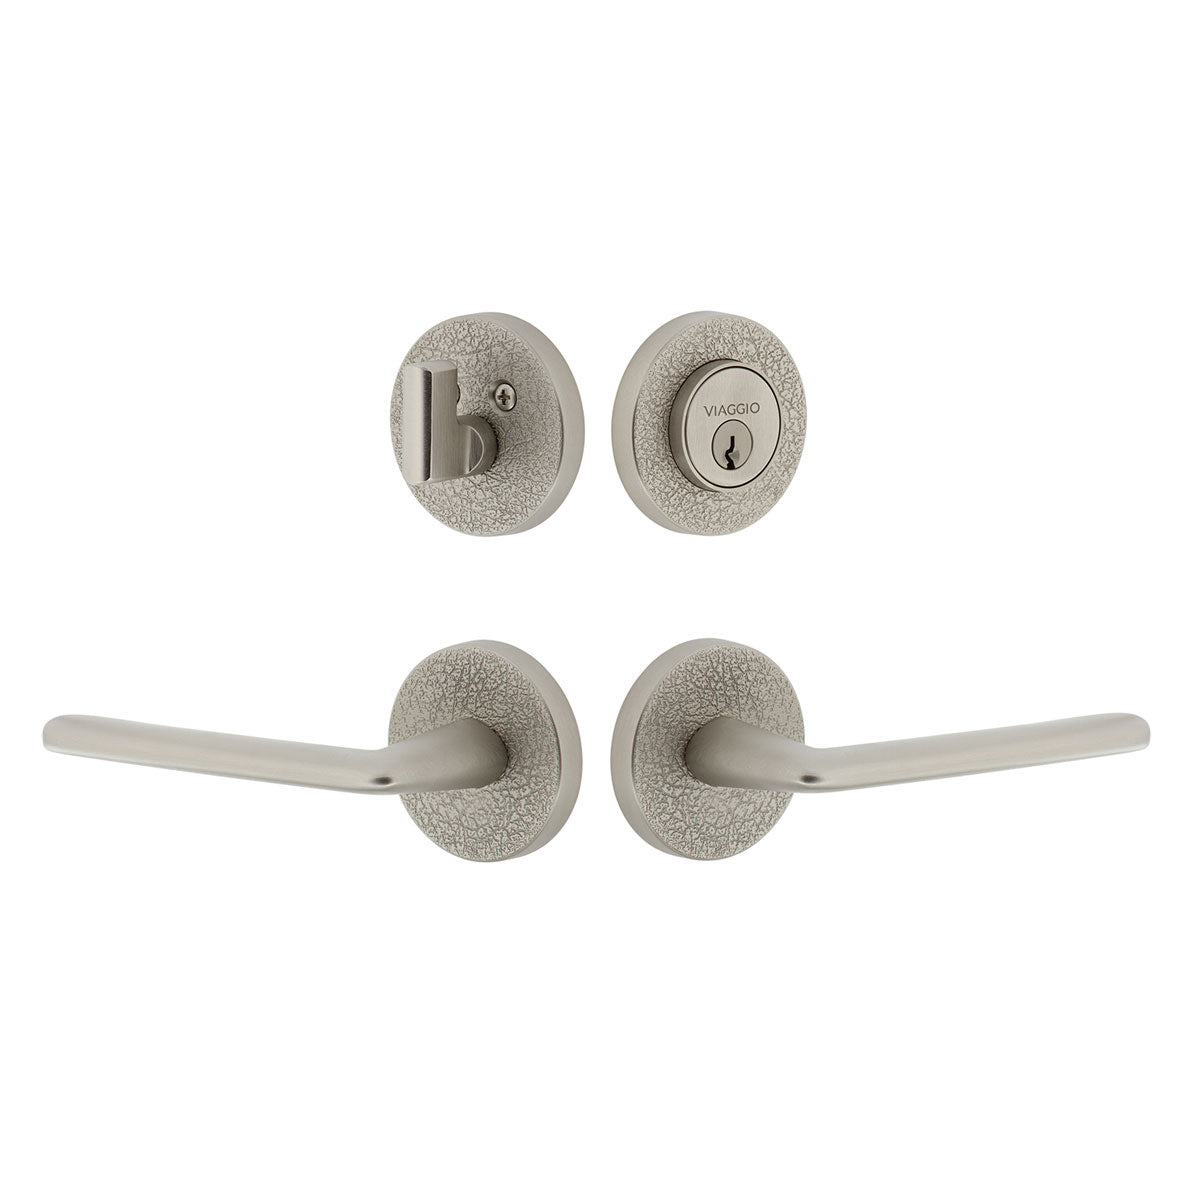 Circolo Leather Rosette Entry Set with Brezza Lever in Satin Nickel